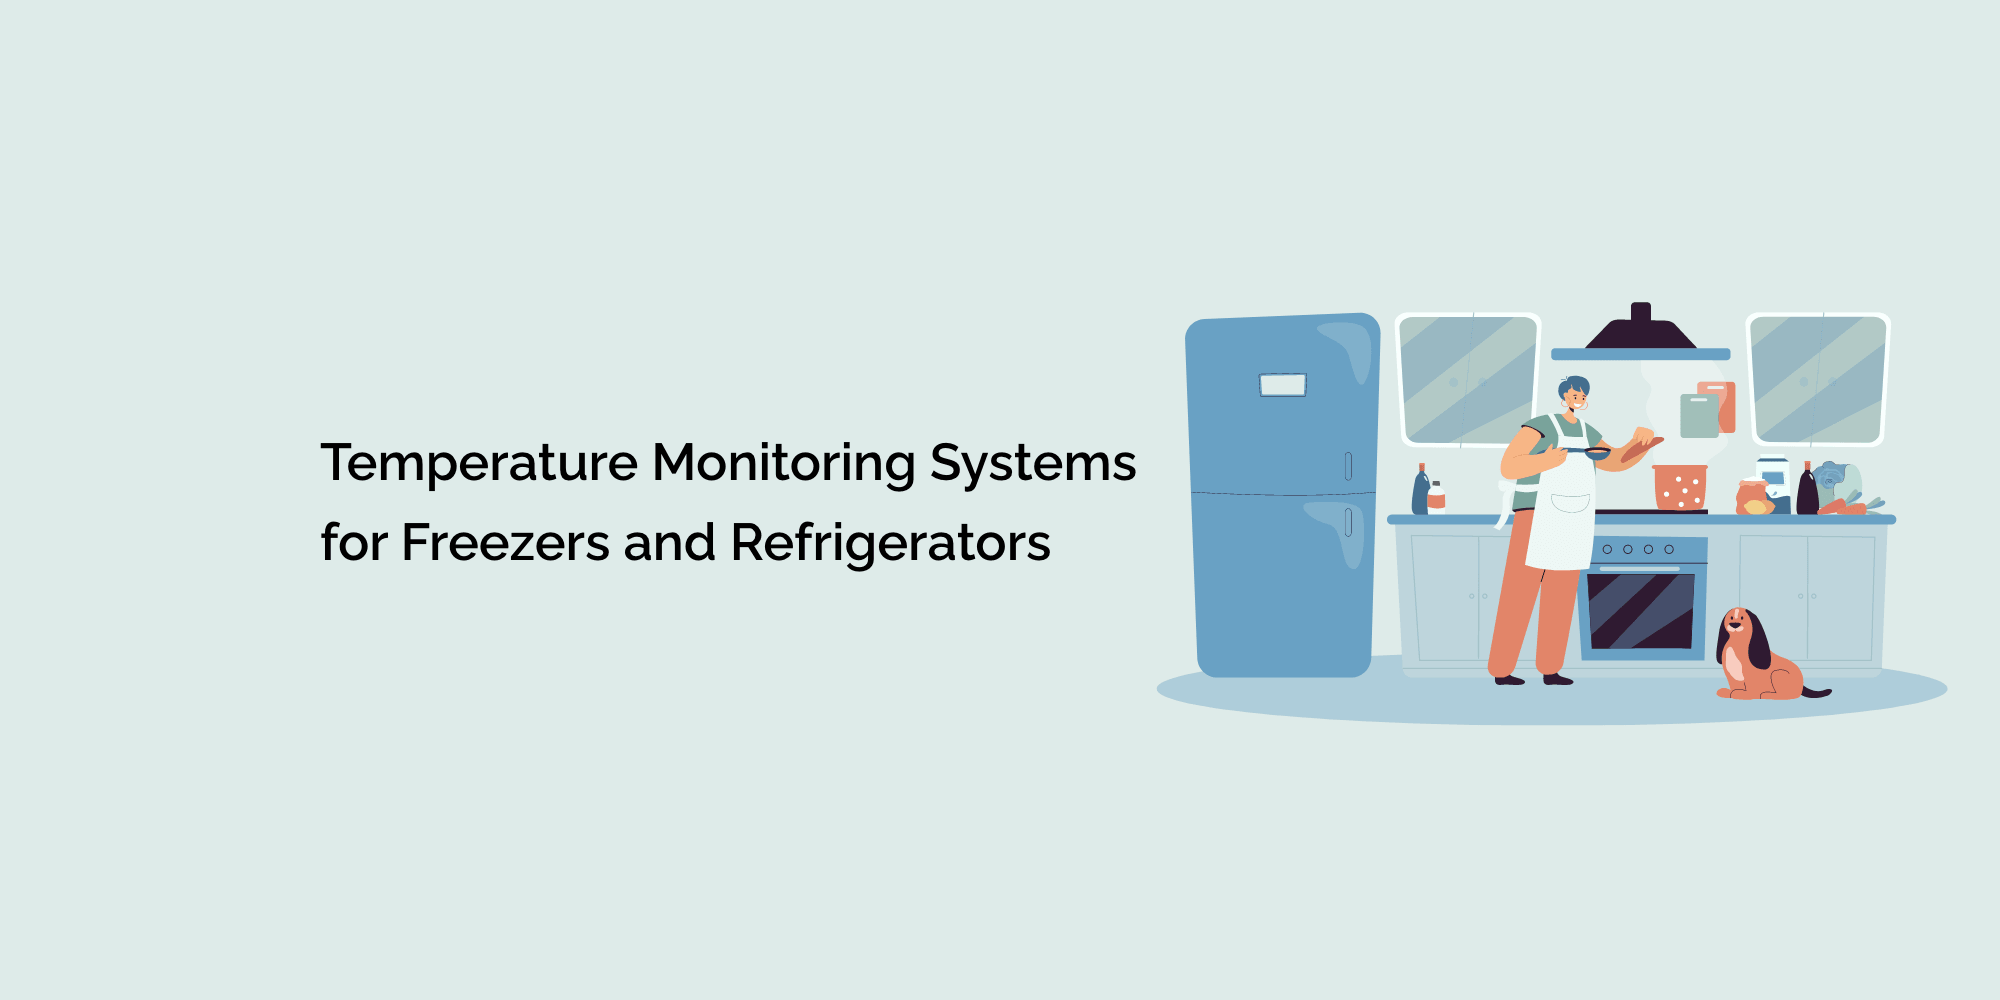 Temperature Monitoring Systems for Freezers and Refrigerators